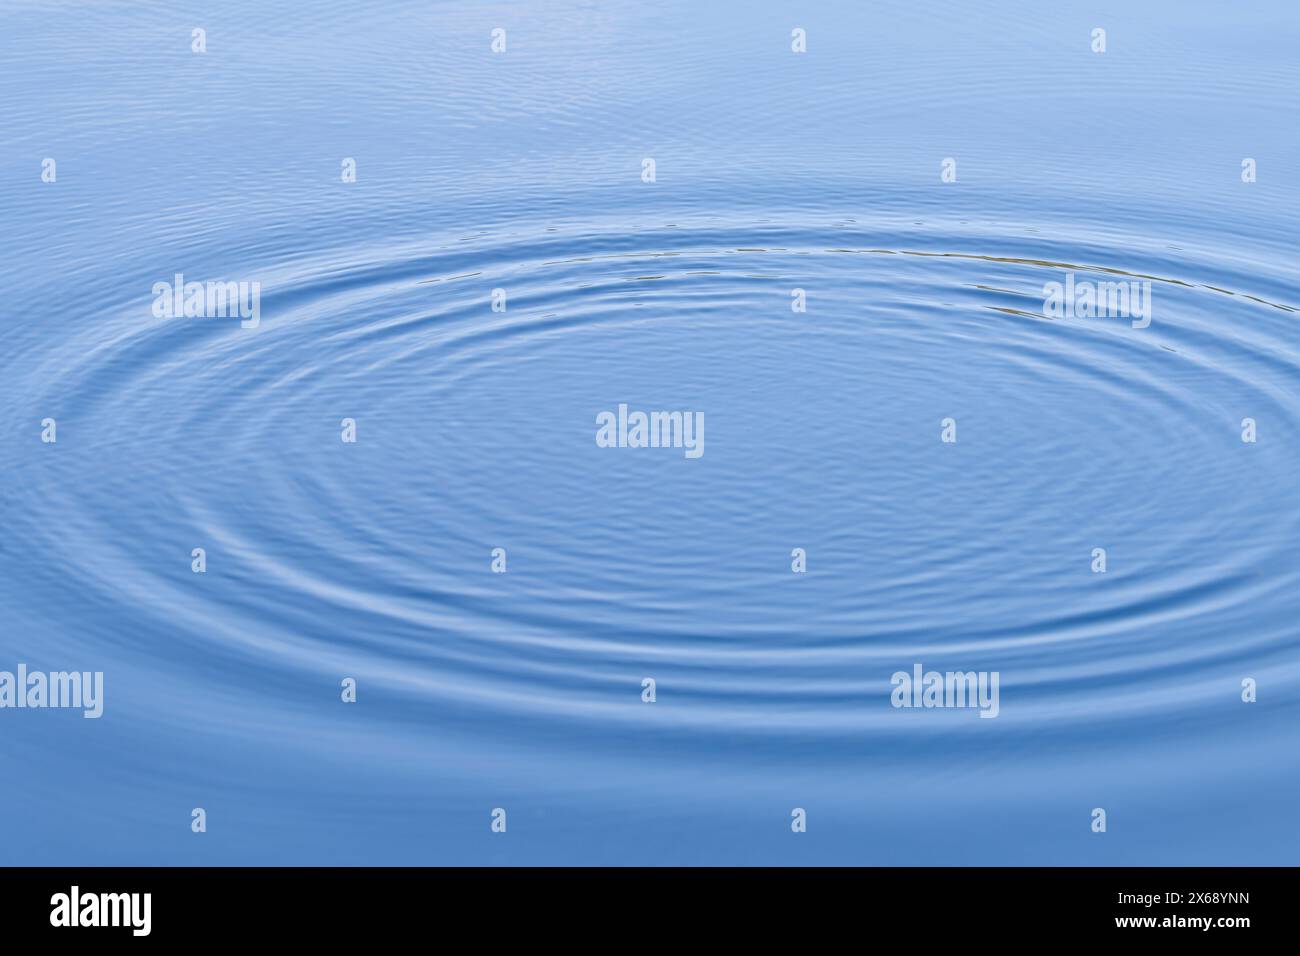 a falling drop of water forms a circle on the surface of a lake, Germany Stock Photo